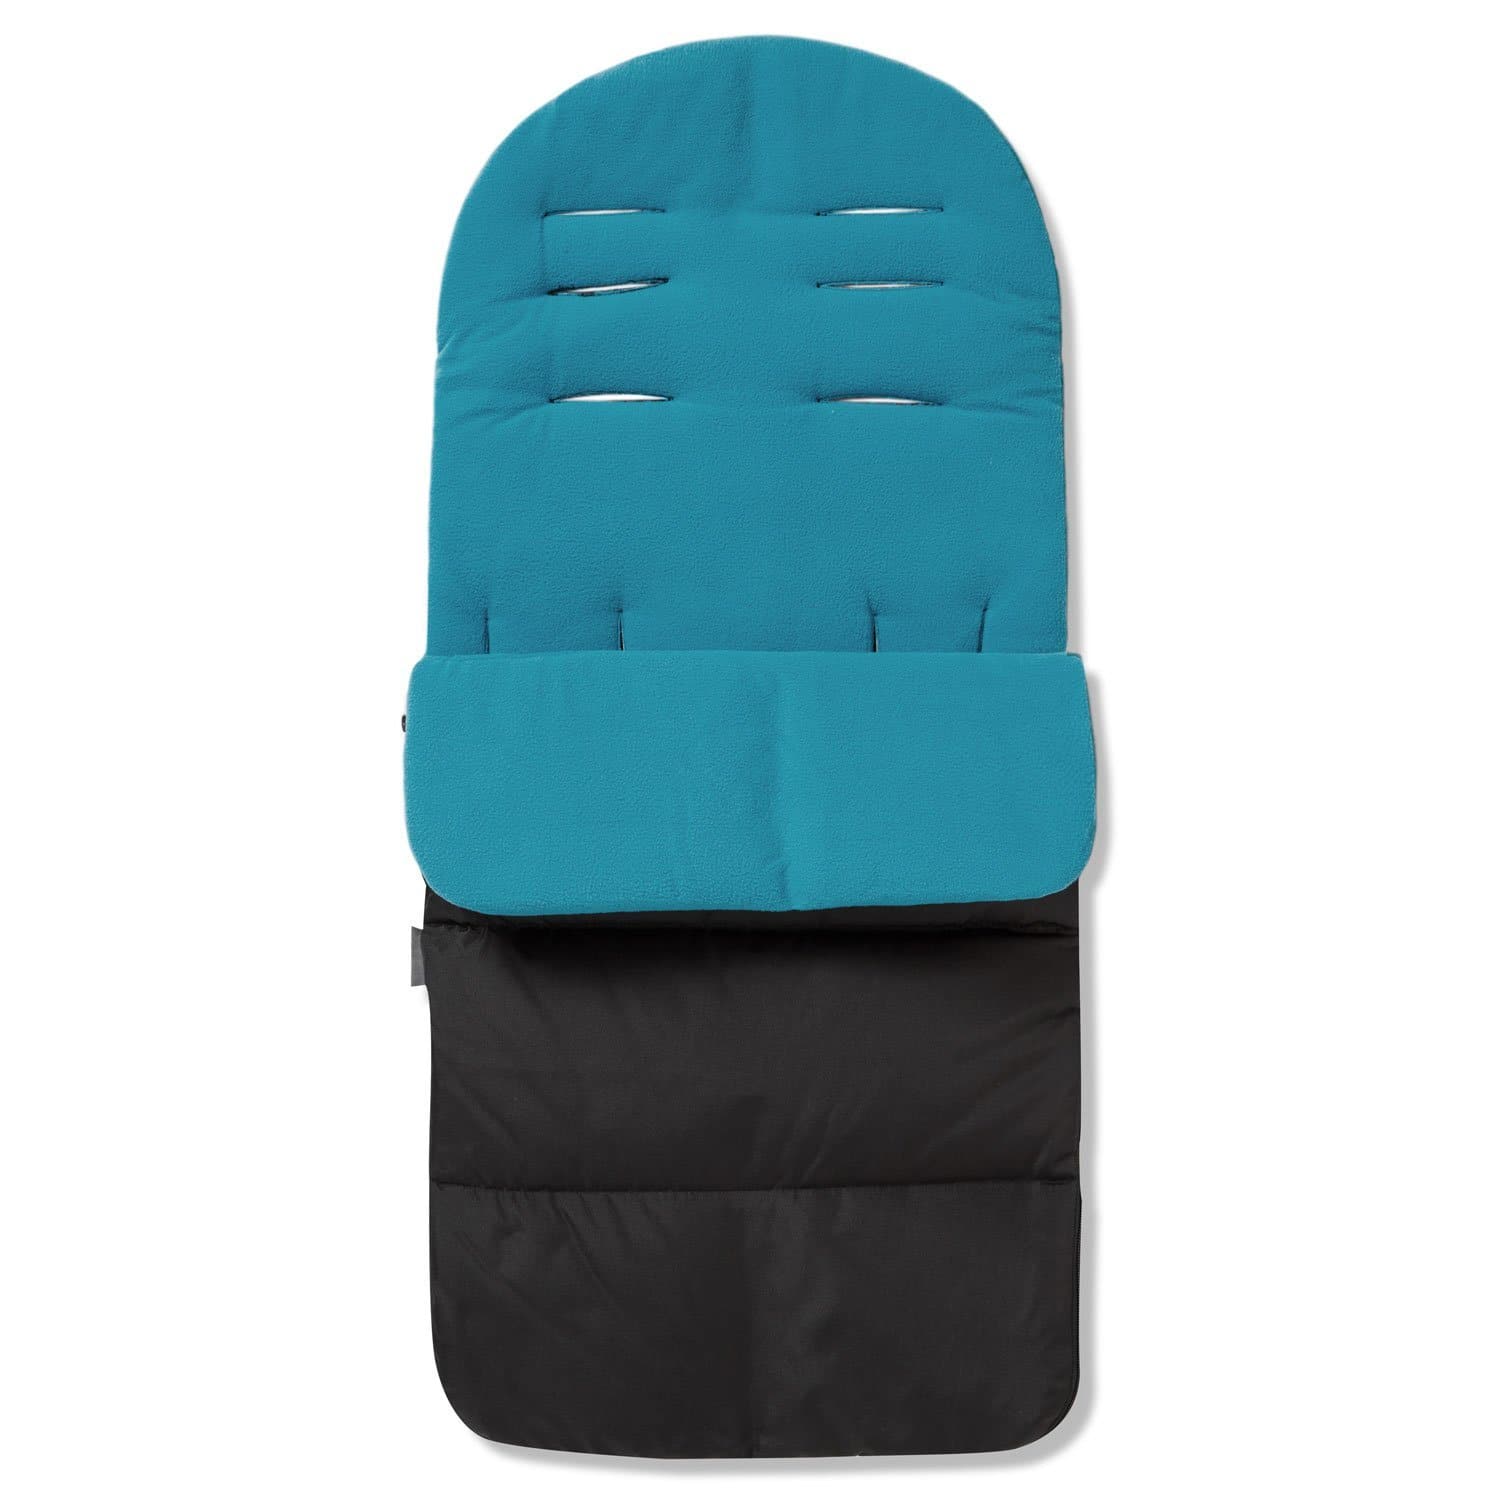 Premium Footmuff / Cosy Toes Compatible with Concord - Ocean Blue / Fits All Models | For Your Little One